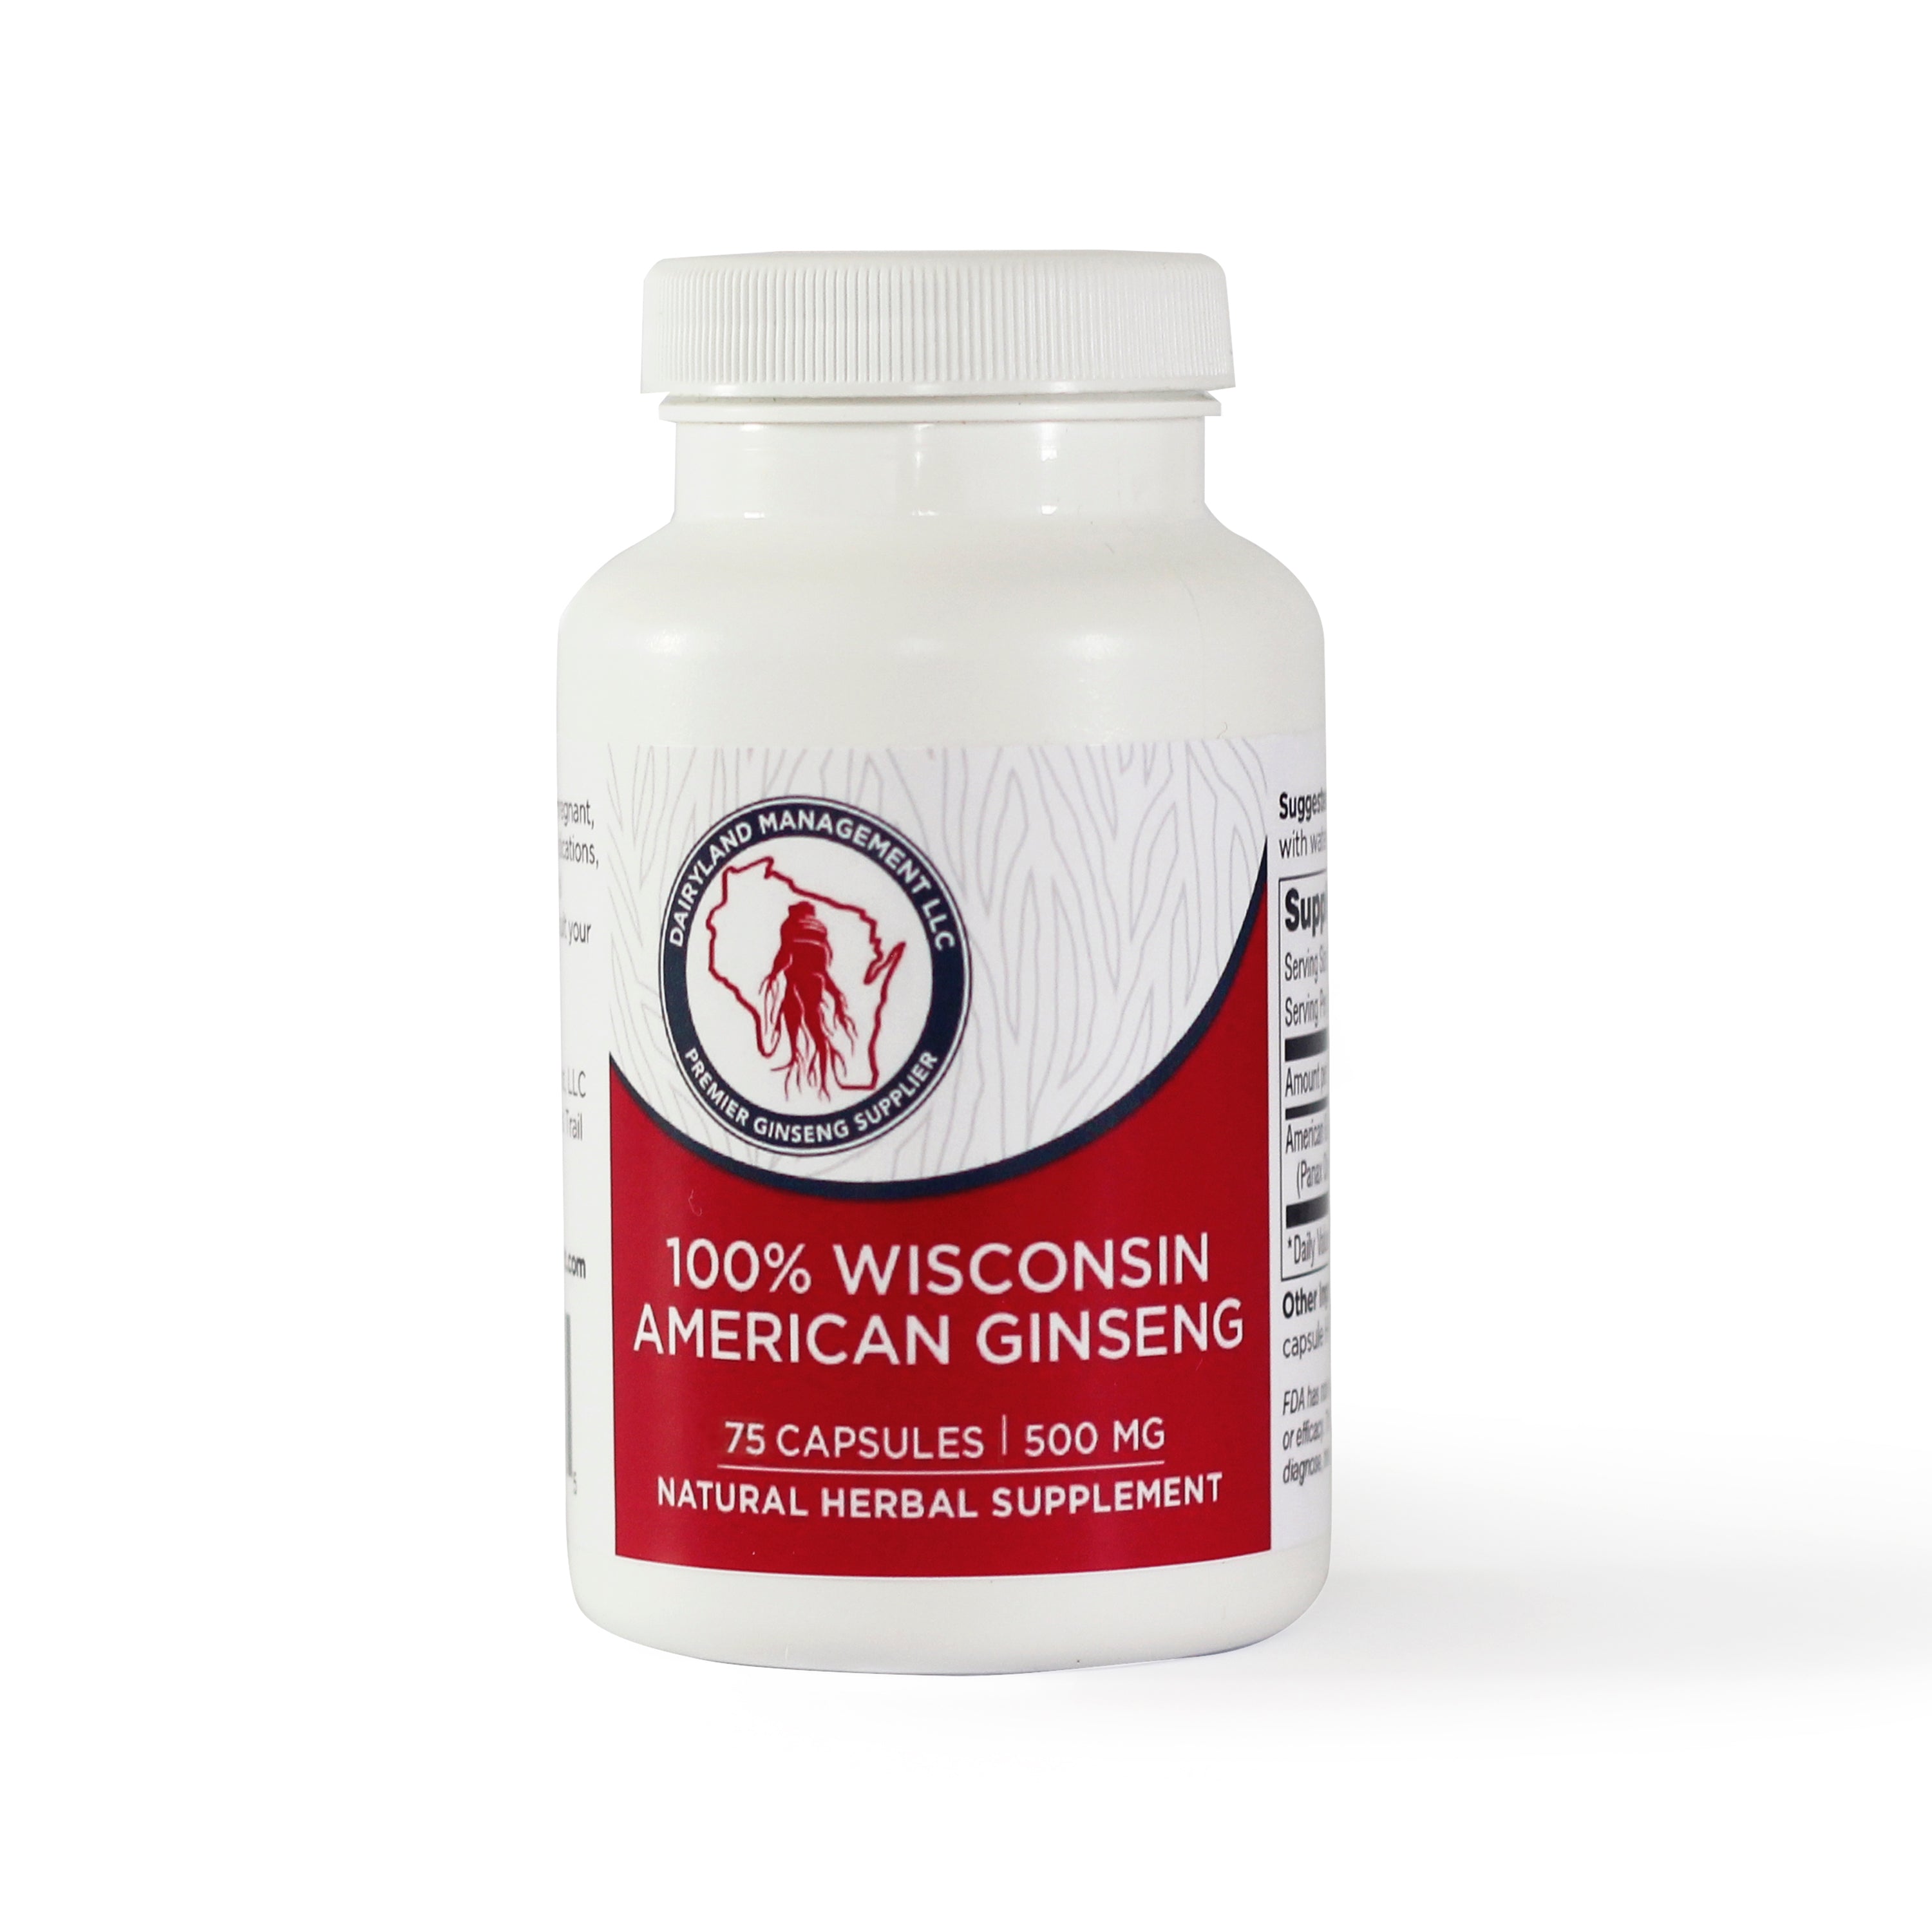 American Ginseng Capsules -500 mg. Potent Ground Ginseng Root - No Fillers, Binders or Other Additives.